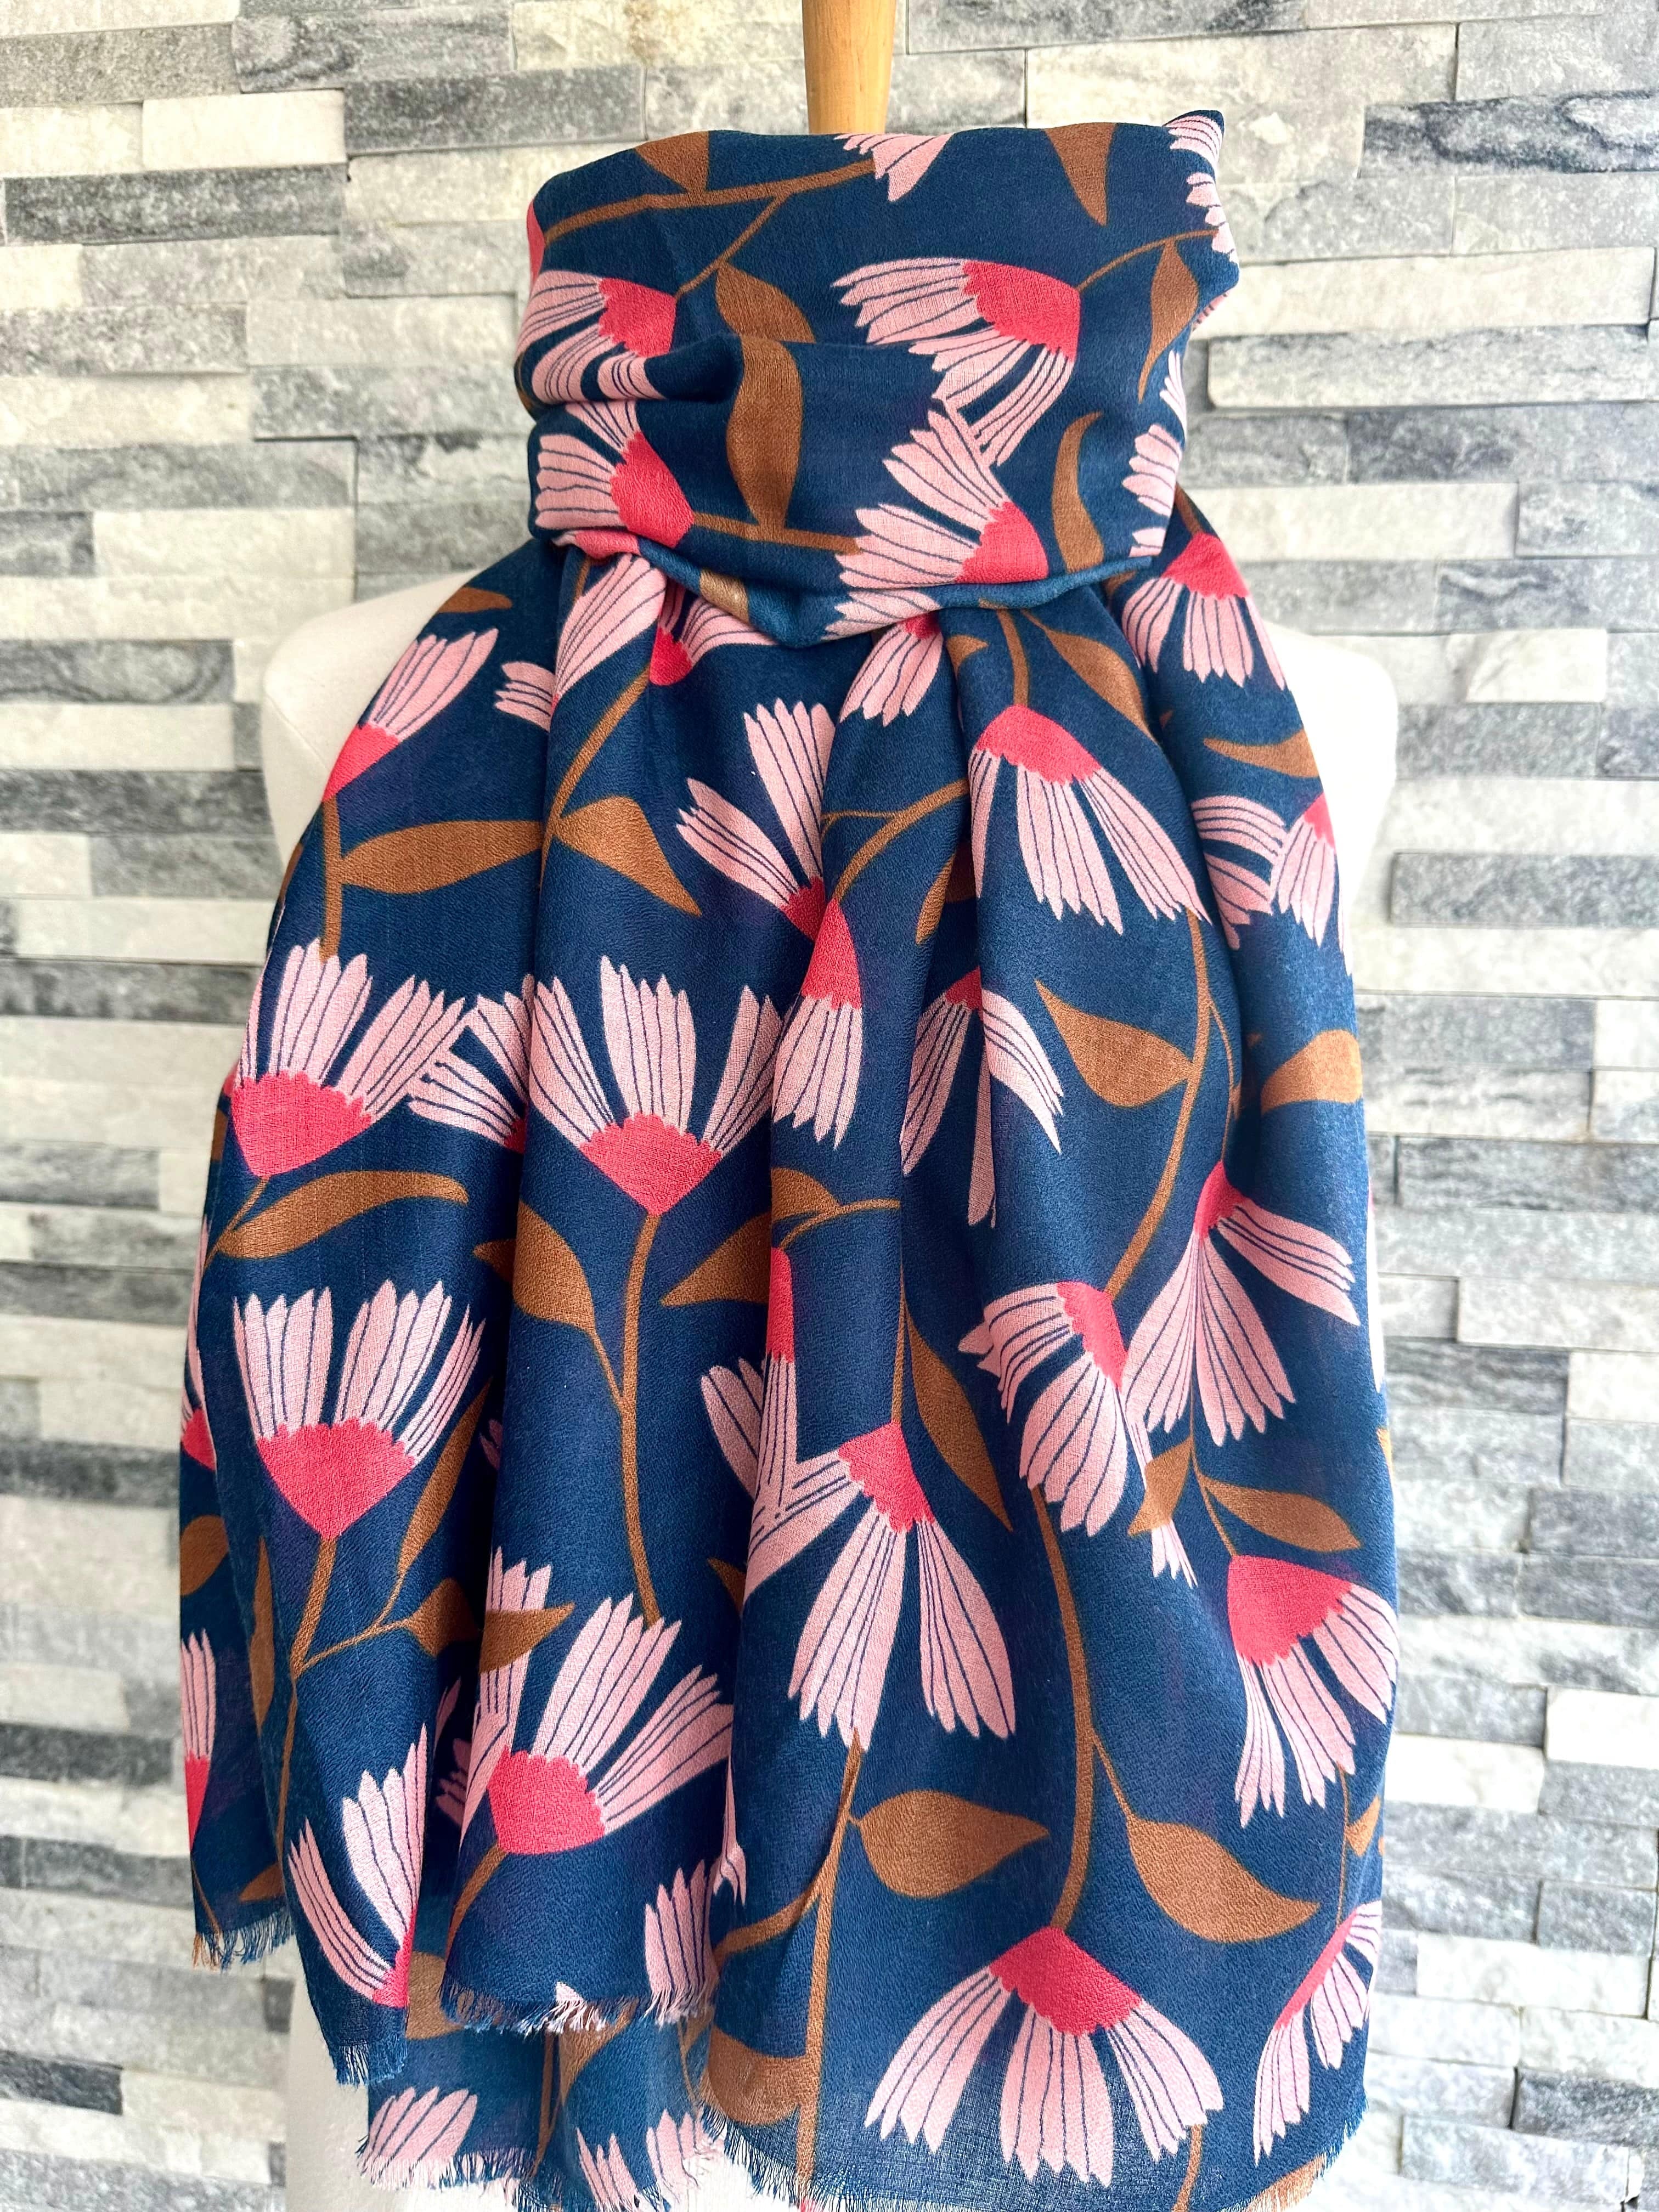 lusciousscarves Red Cuckoo Trailing Flowers Design Scarf , Navy, Pink and Tan.